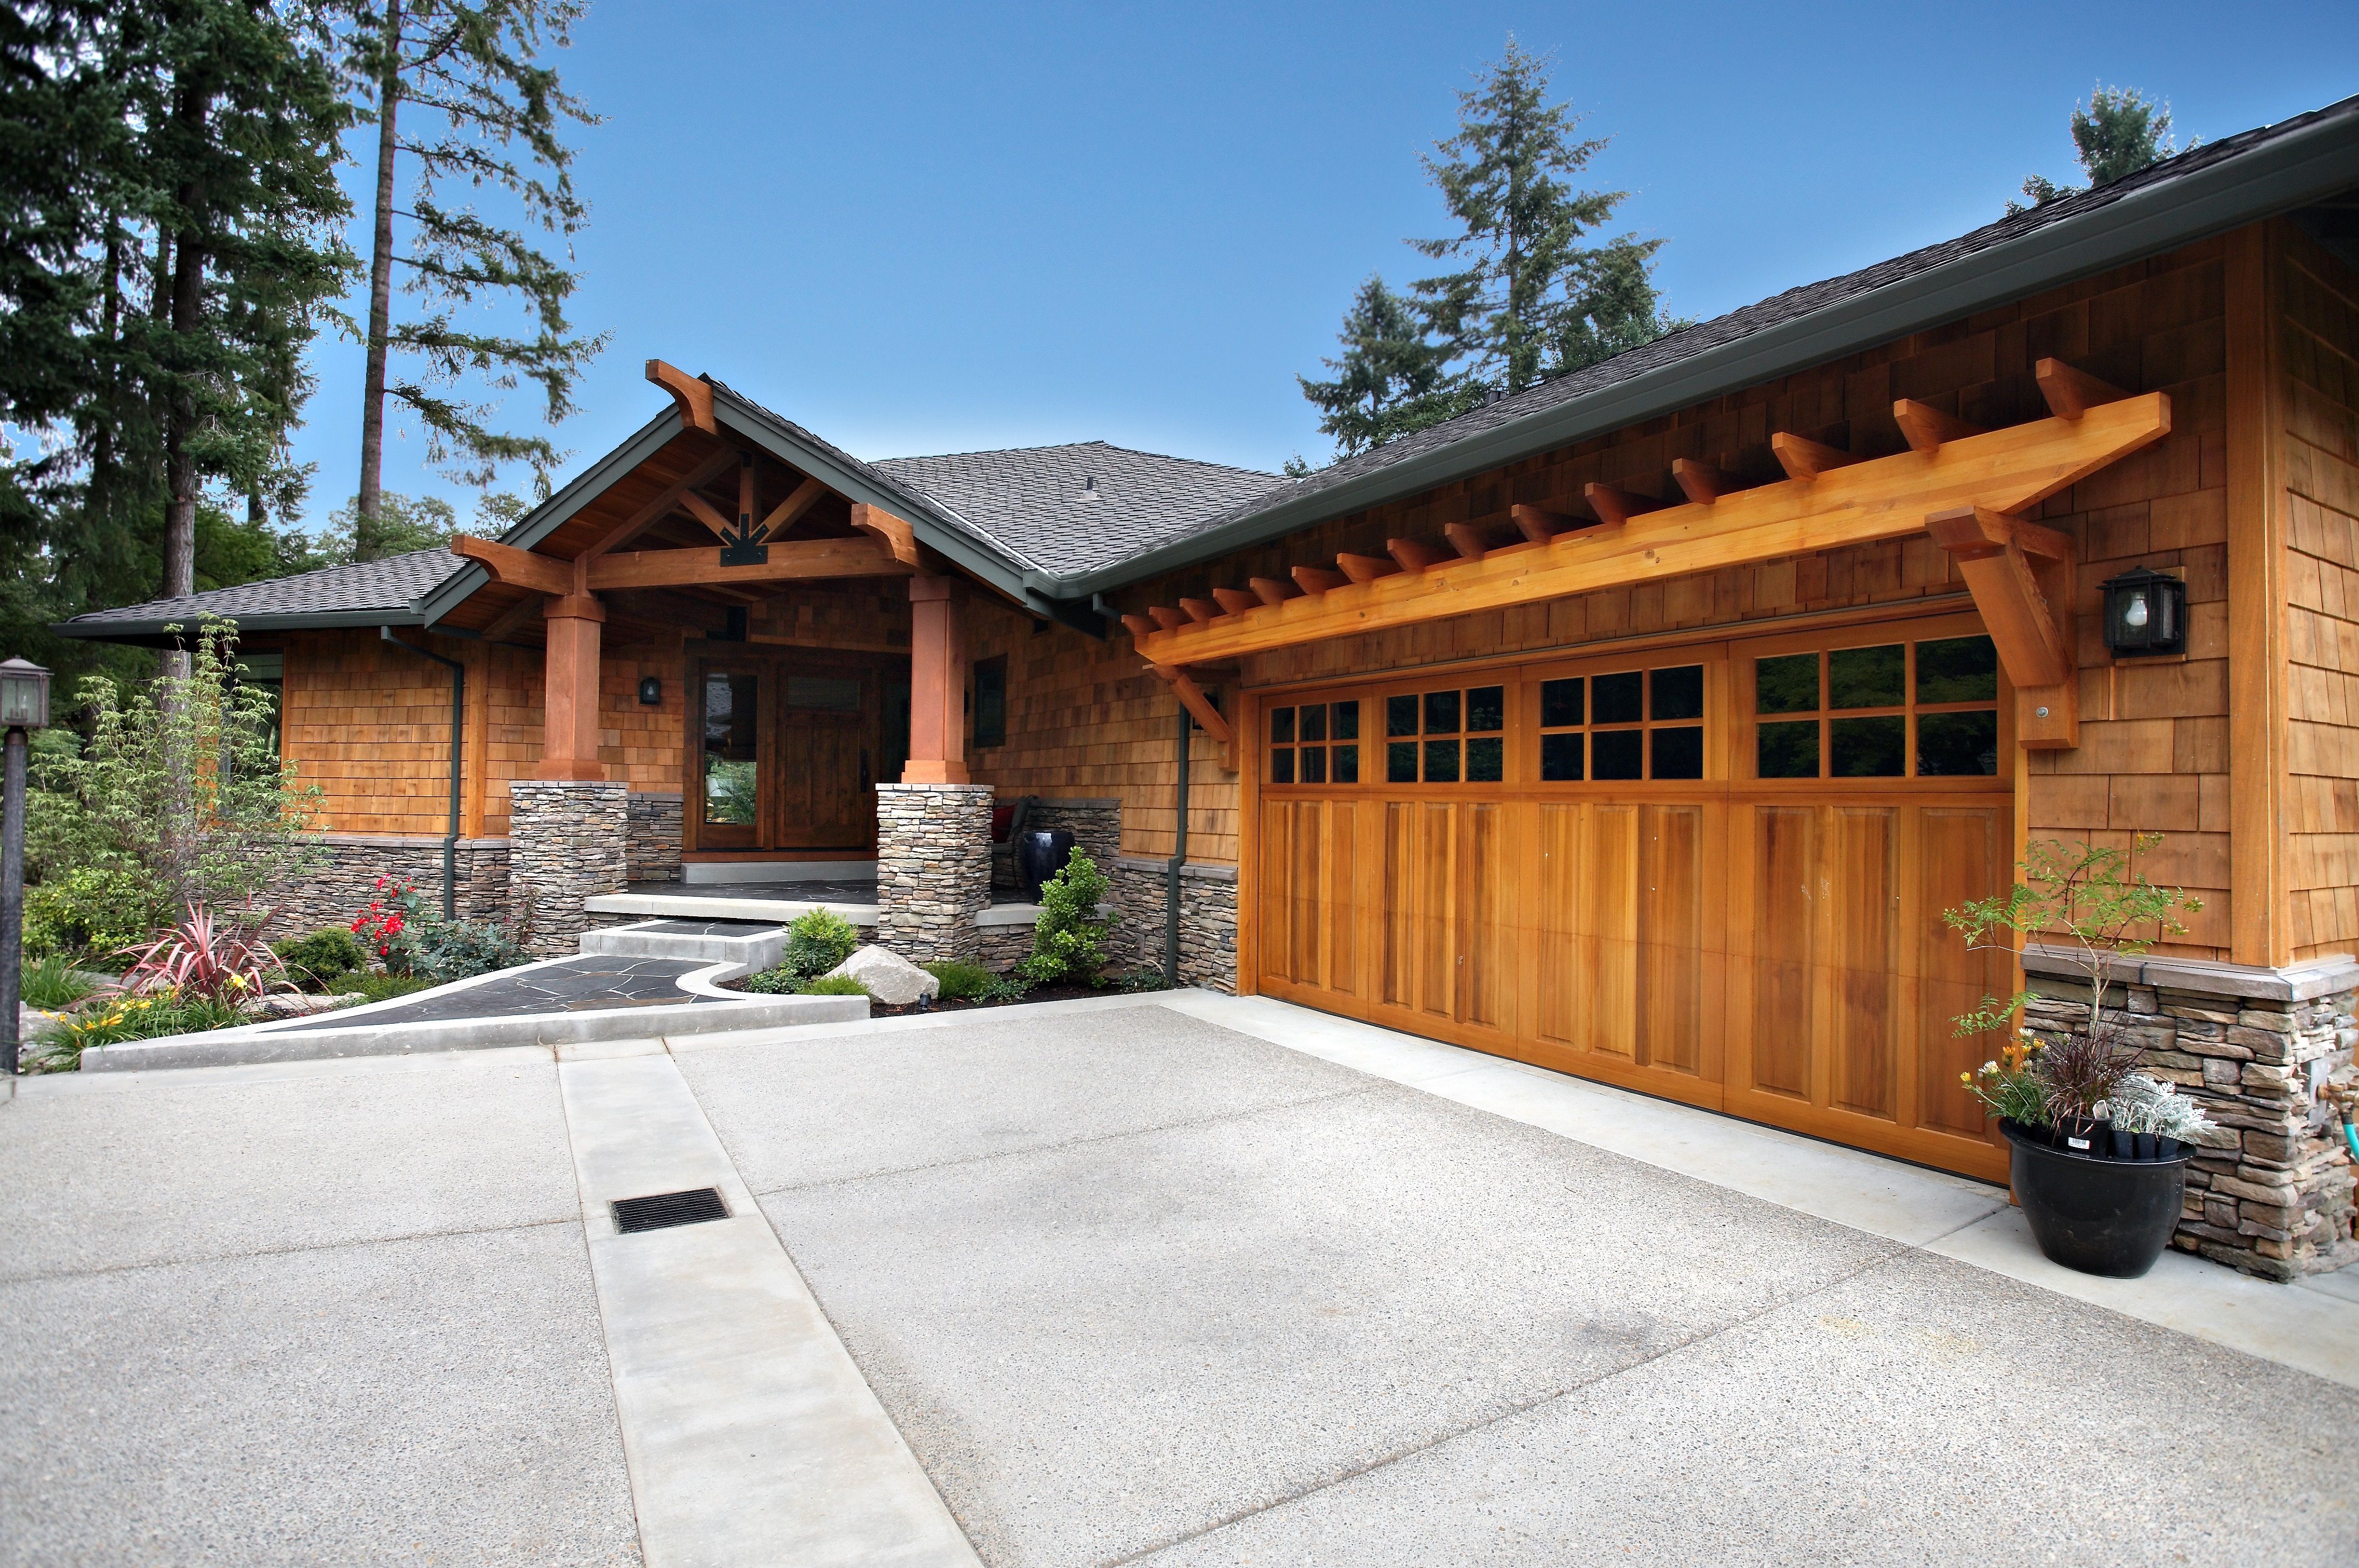 Rustic Wooden Garage Architecture (View 12 of 38)